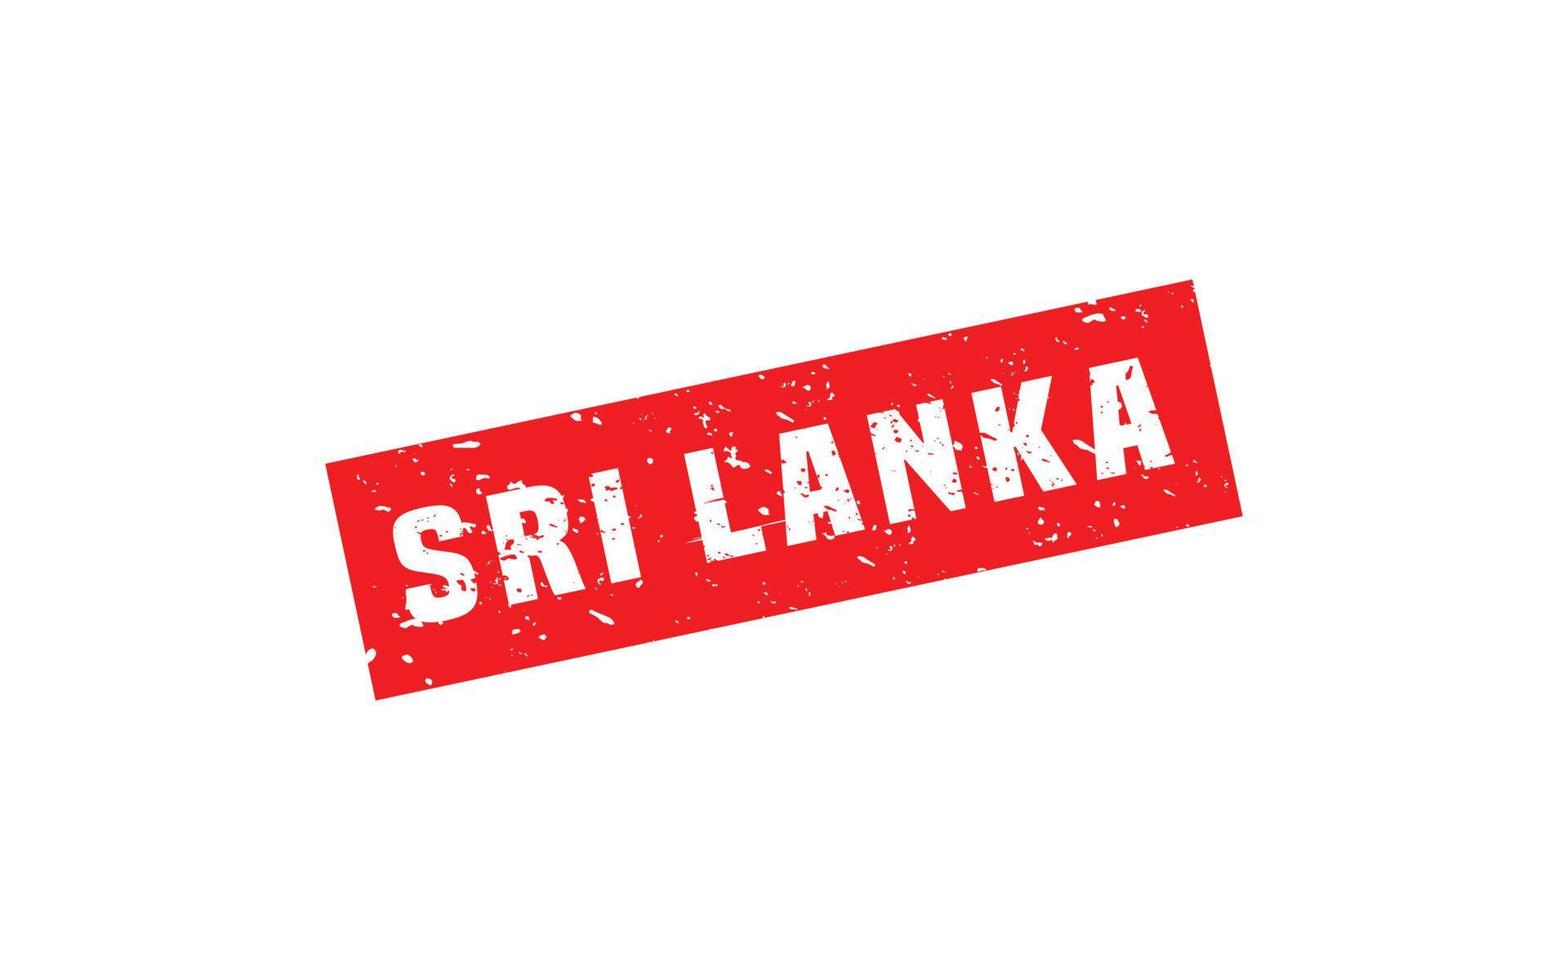 SRI LANKA stamp rubber with grunge style on white background vector